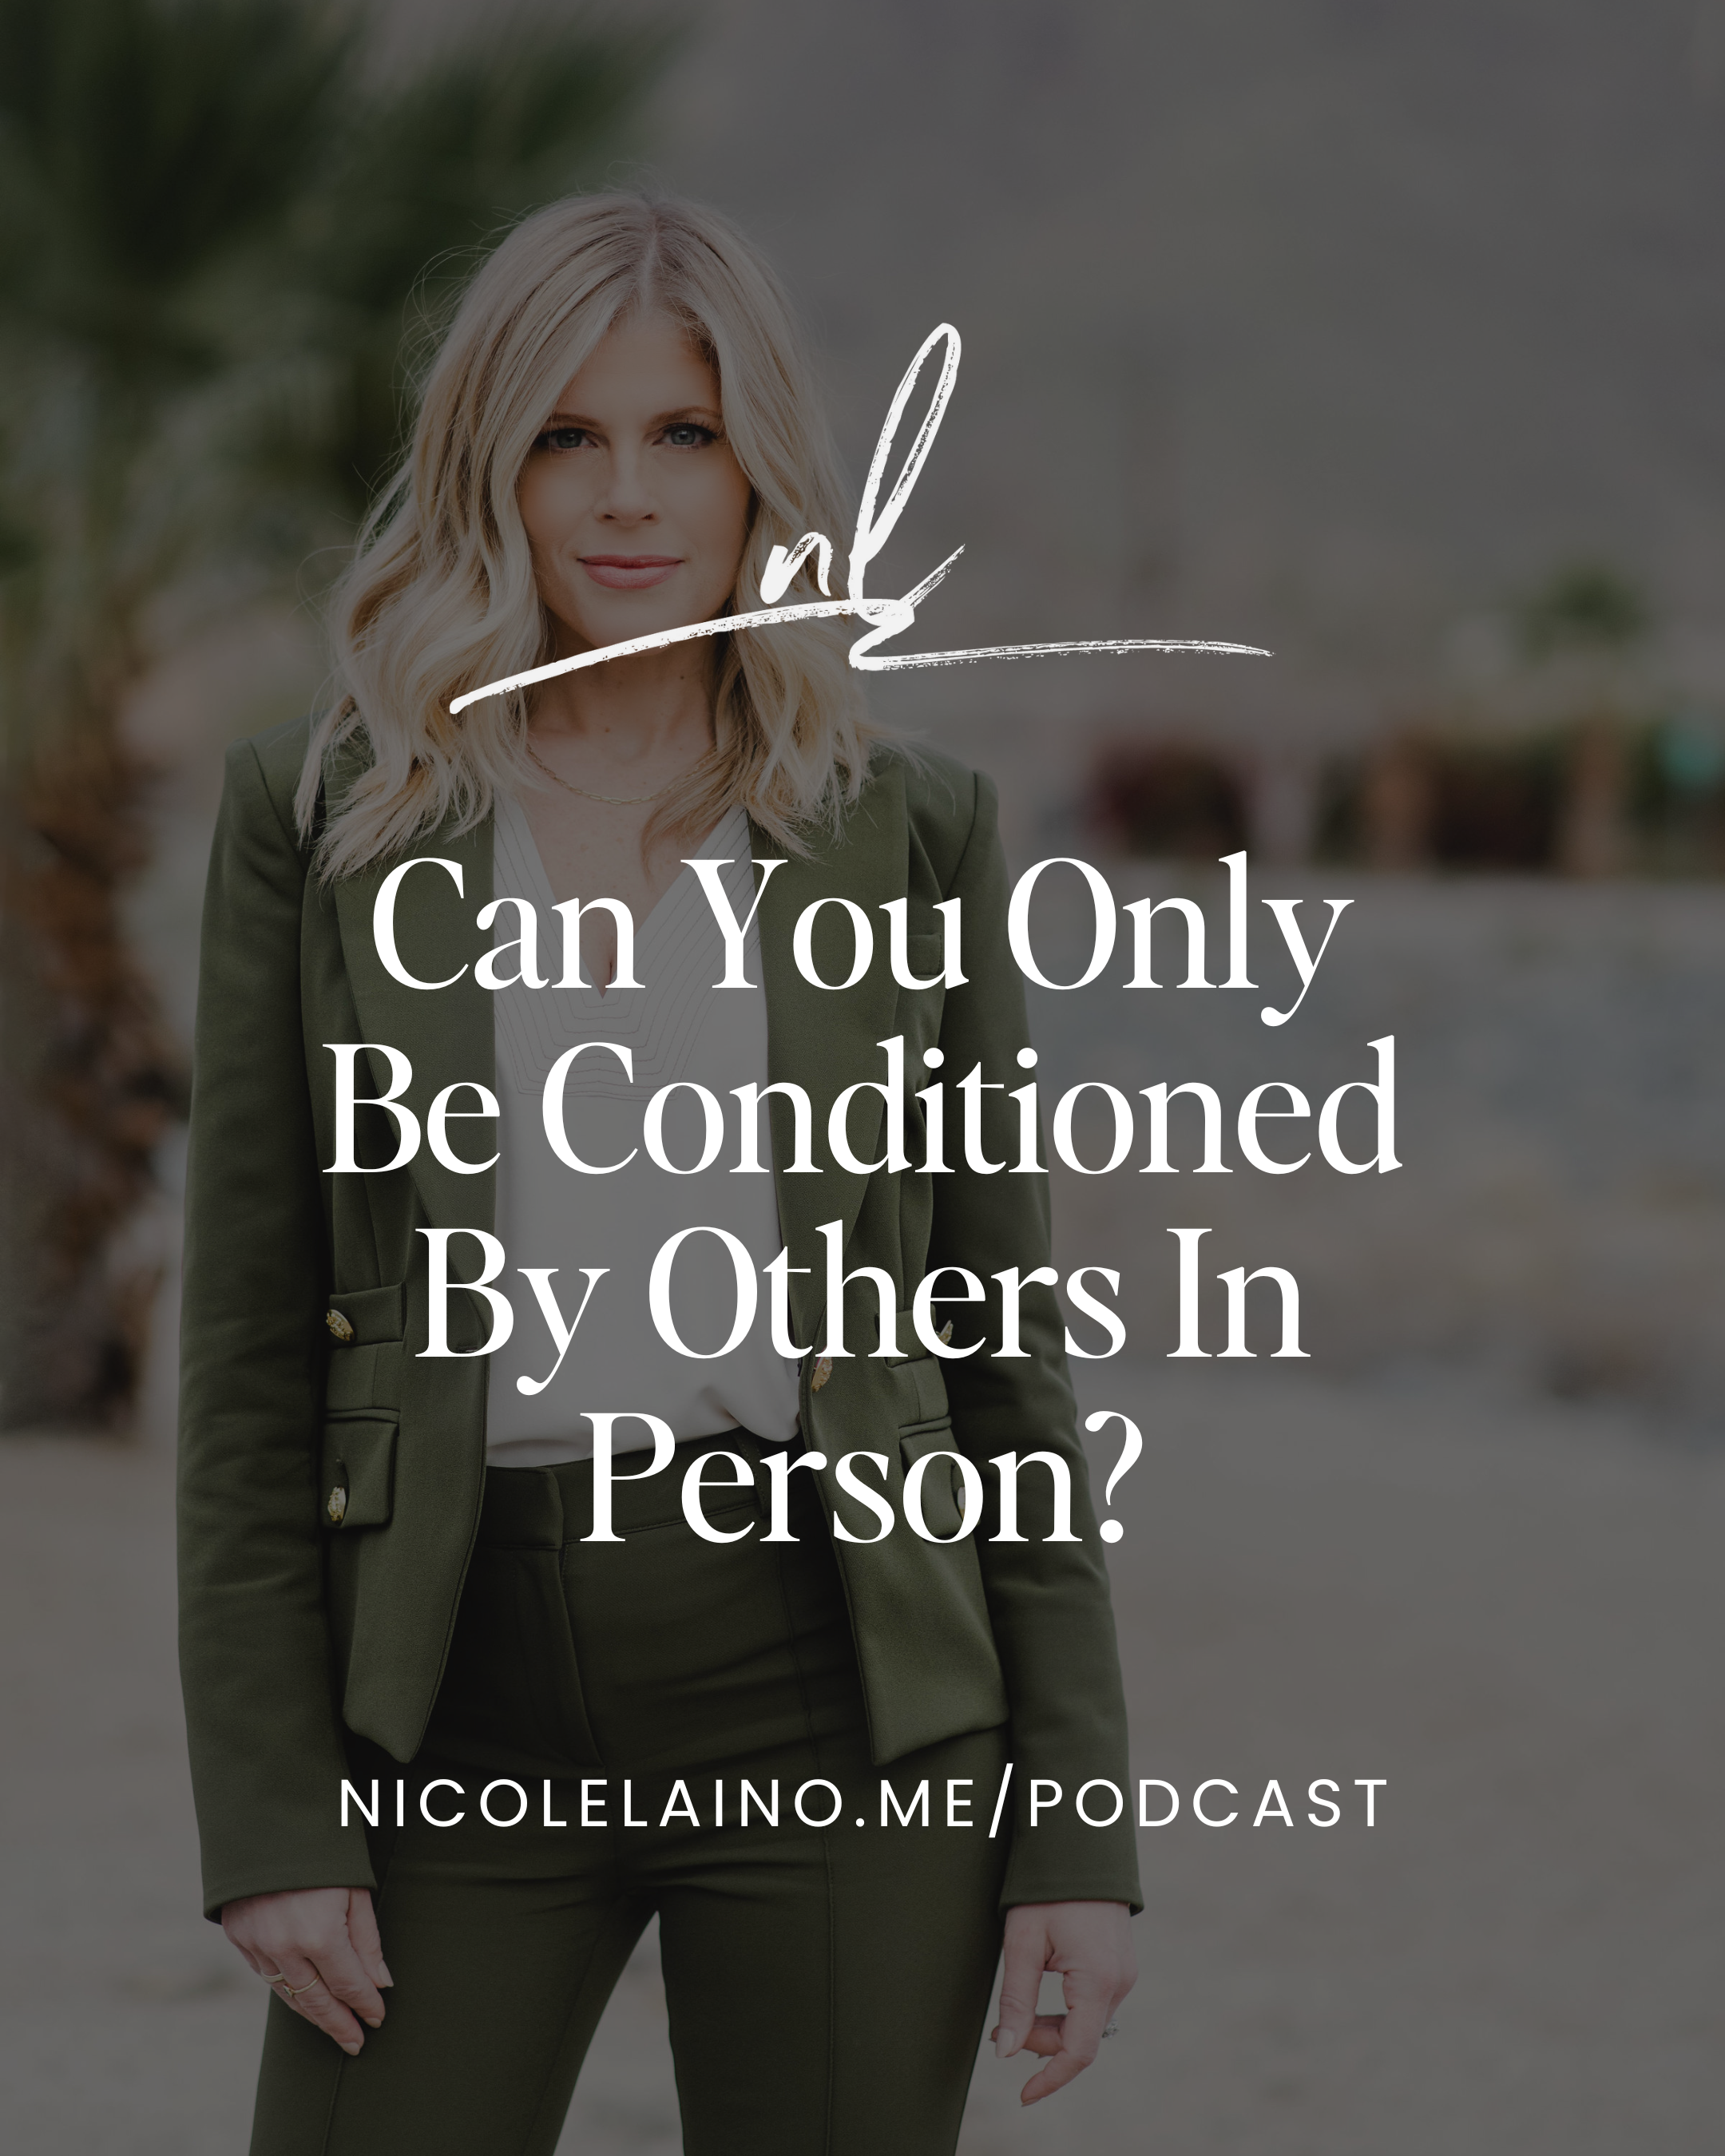 Can You Only Be Conditioned By Others In Person?